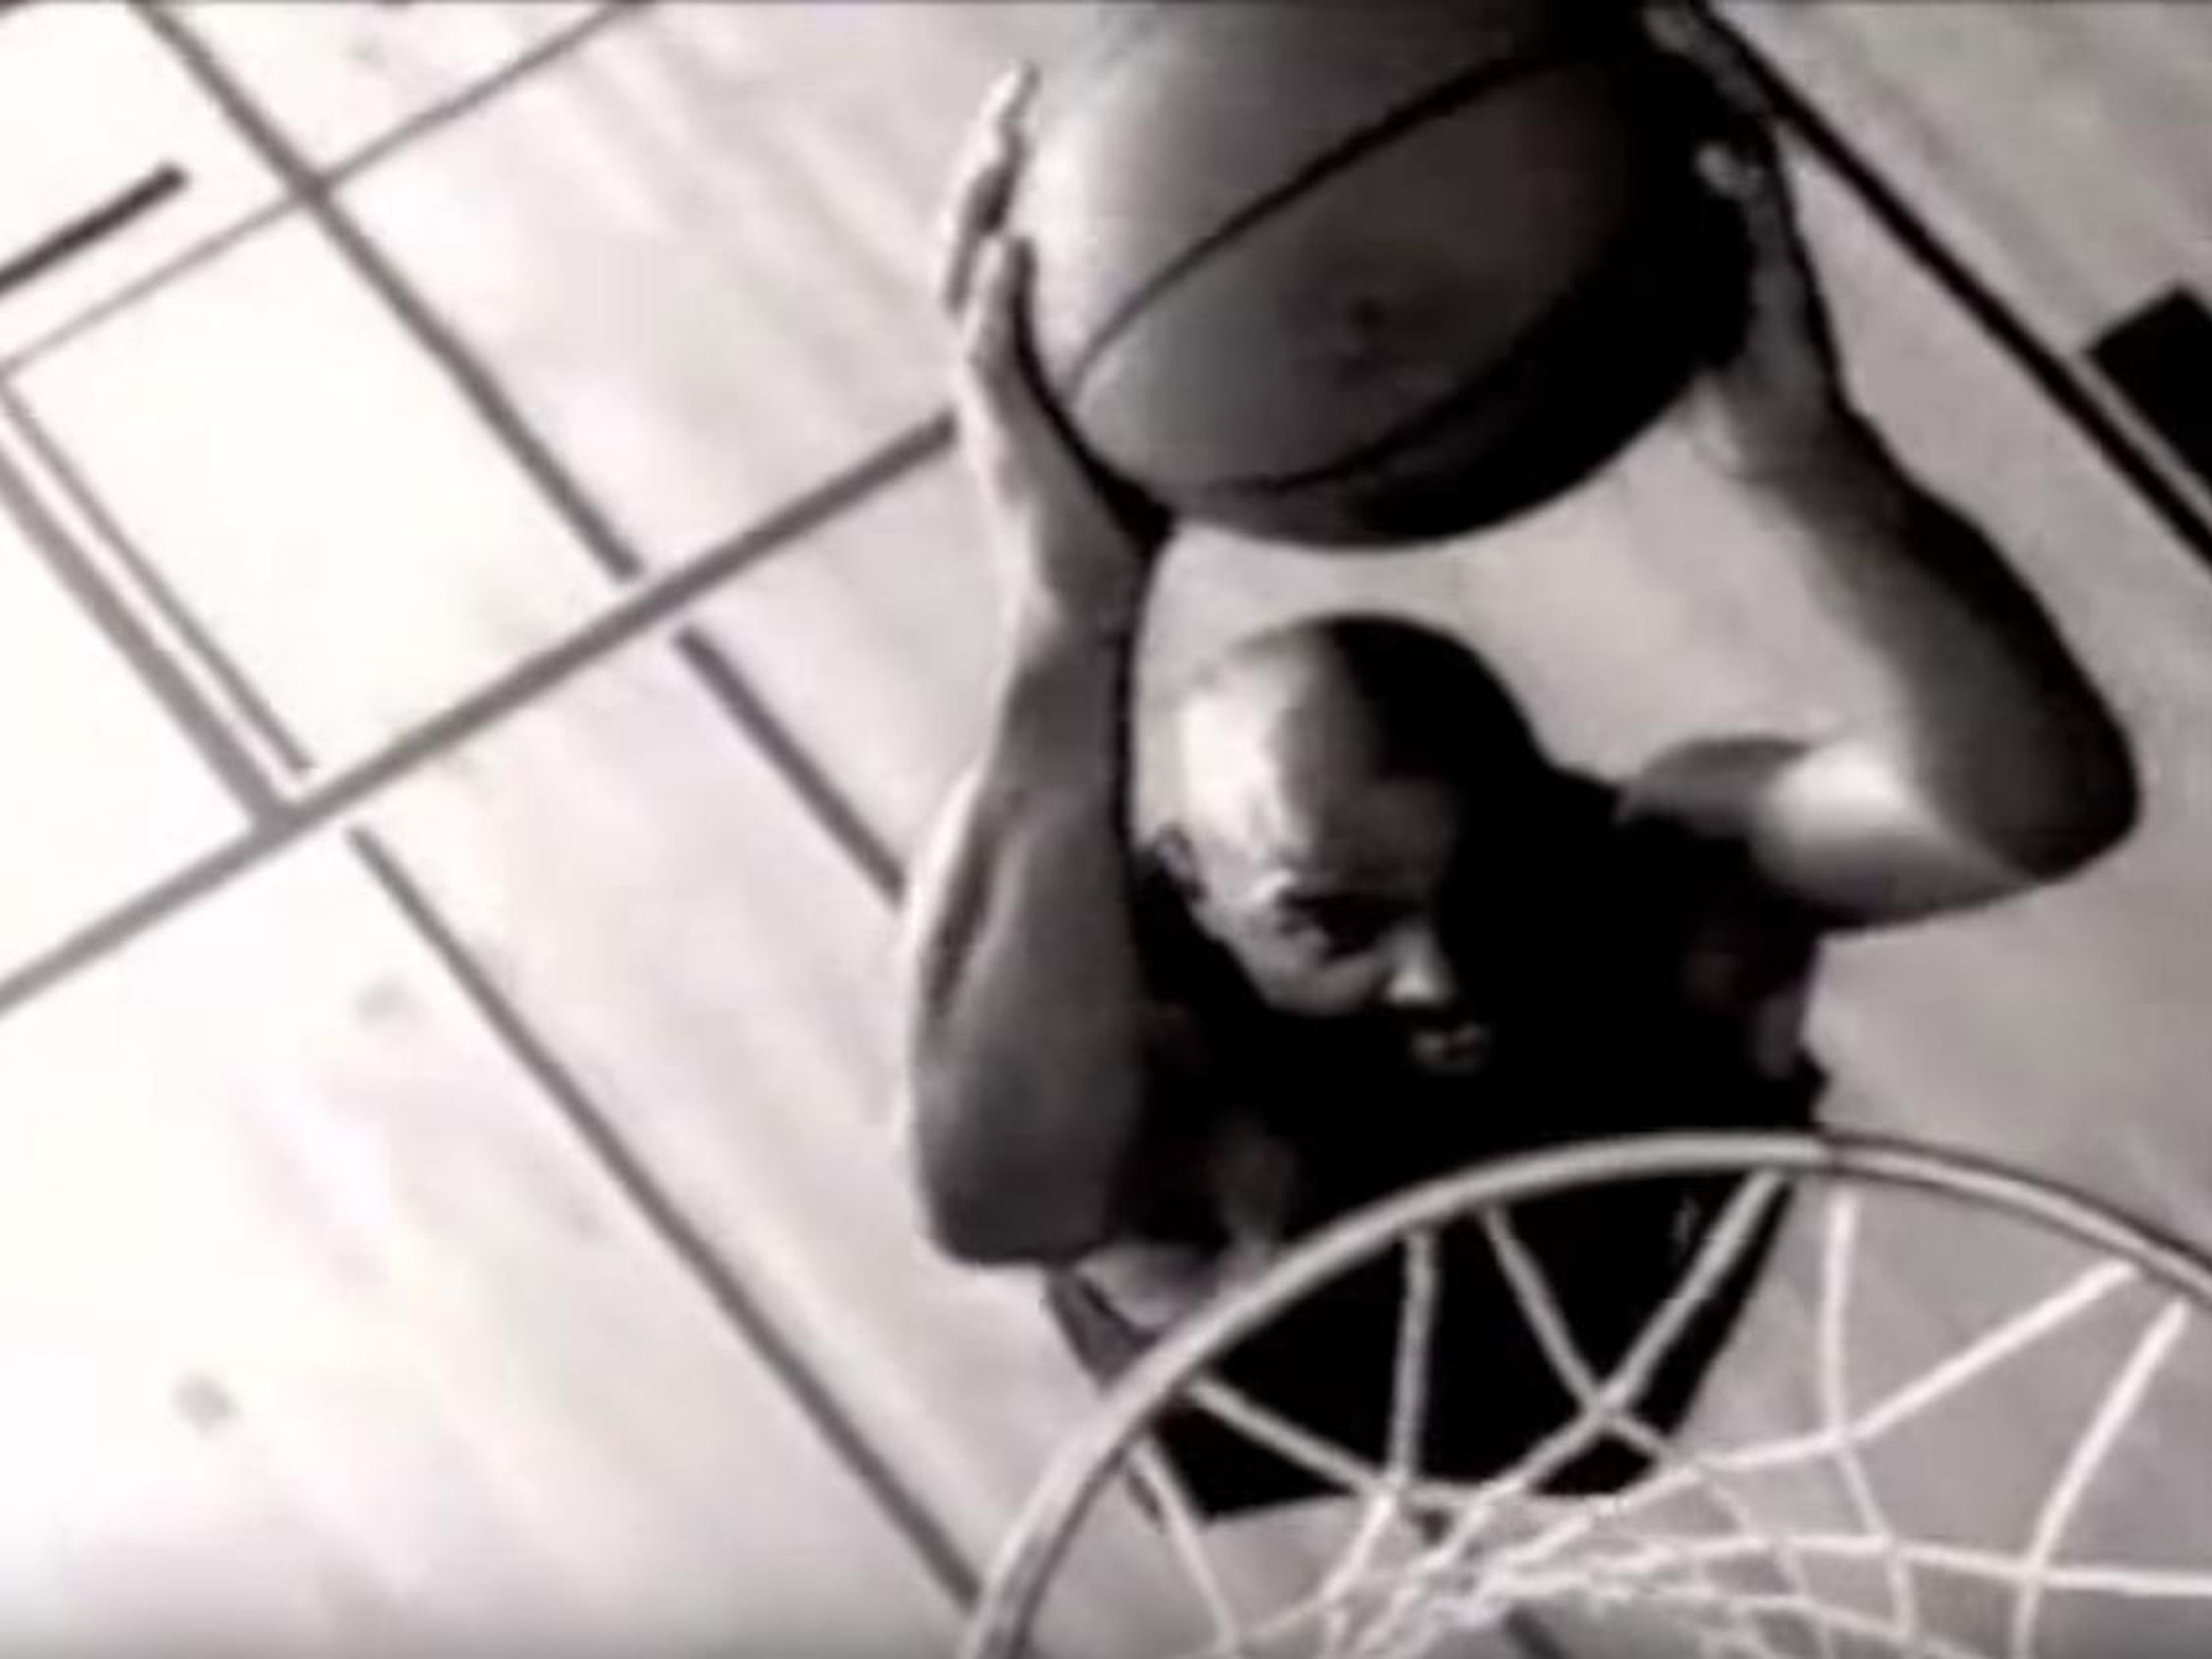 In 1993, an ad starring Charles Barkley sparked a conversation about whether celebrities and professional athletes should be held to higher standards. "I'm not paid to be a role model. I'm paid to wreak havoc on the basketball